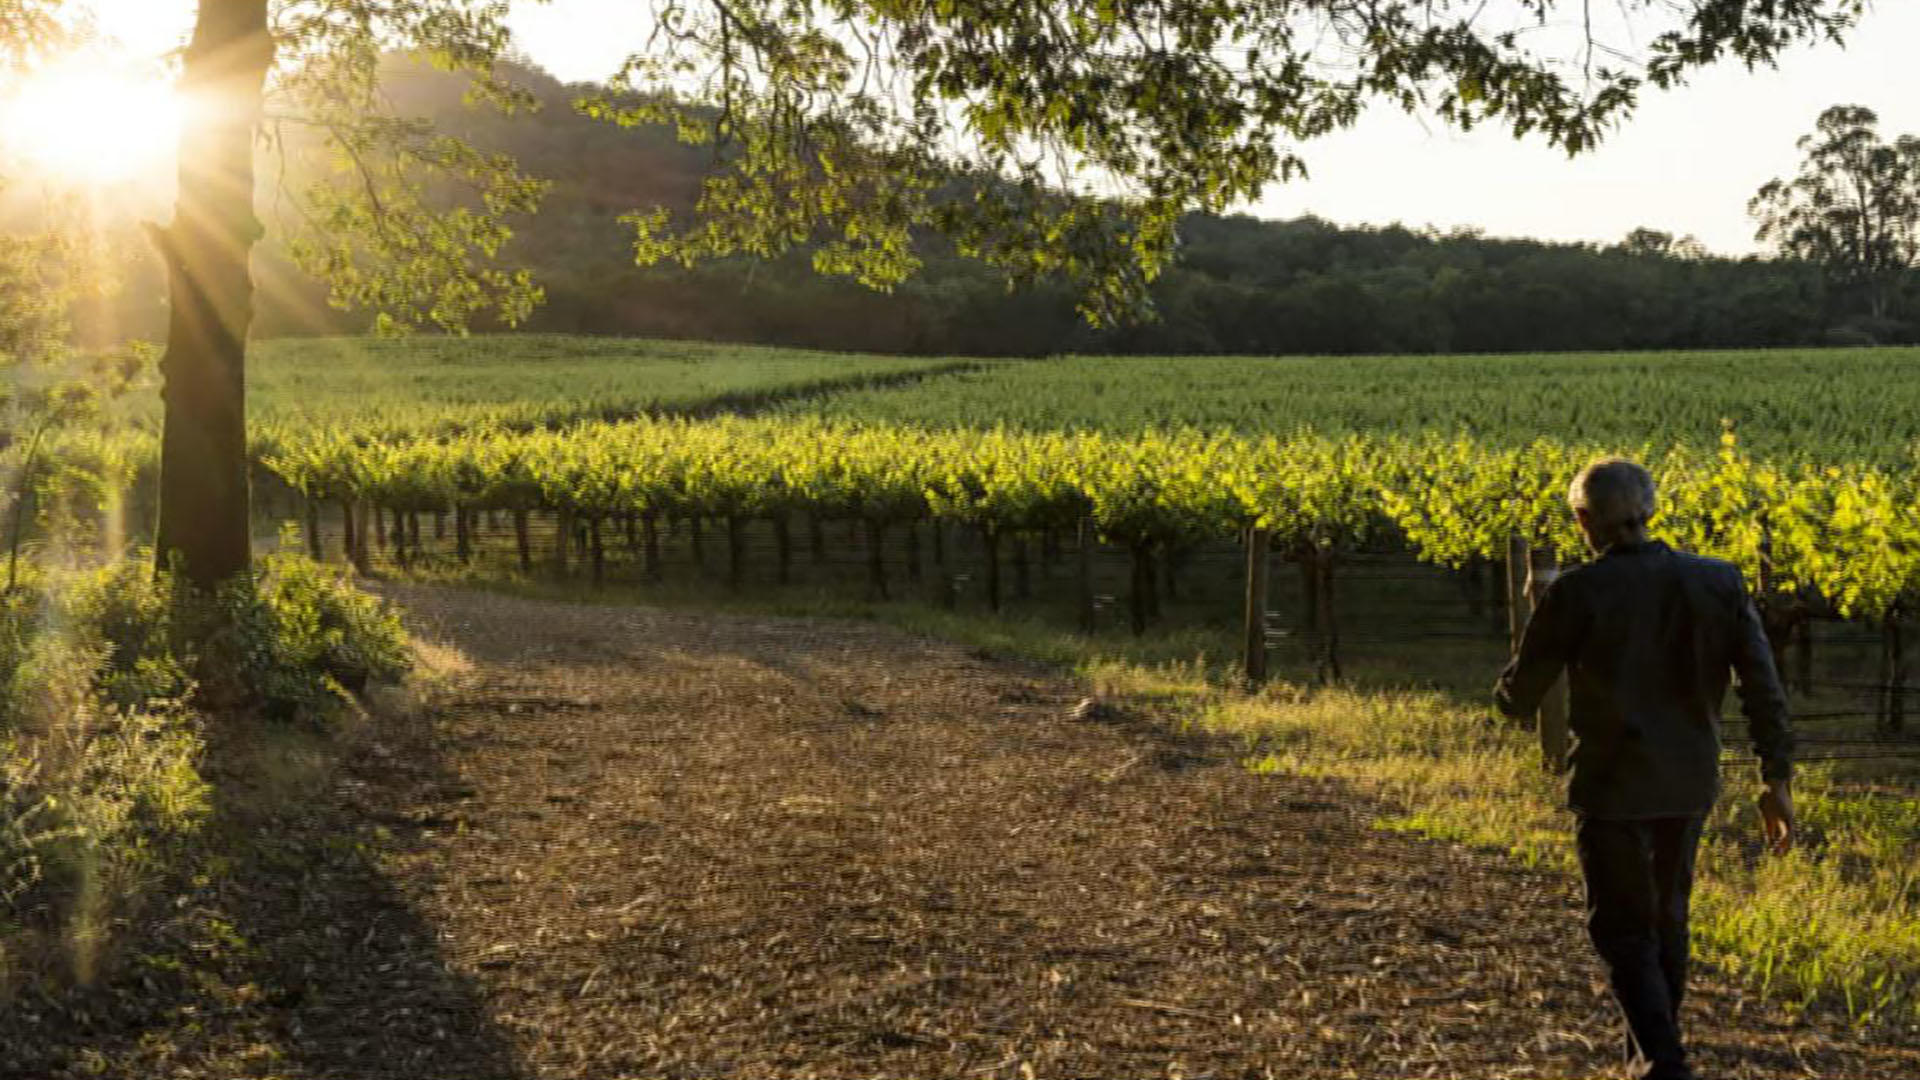 90% of some of the world's wine regions could disappear, study finds